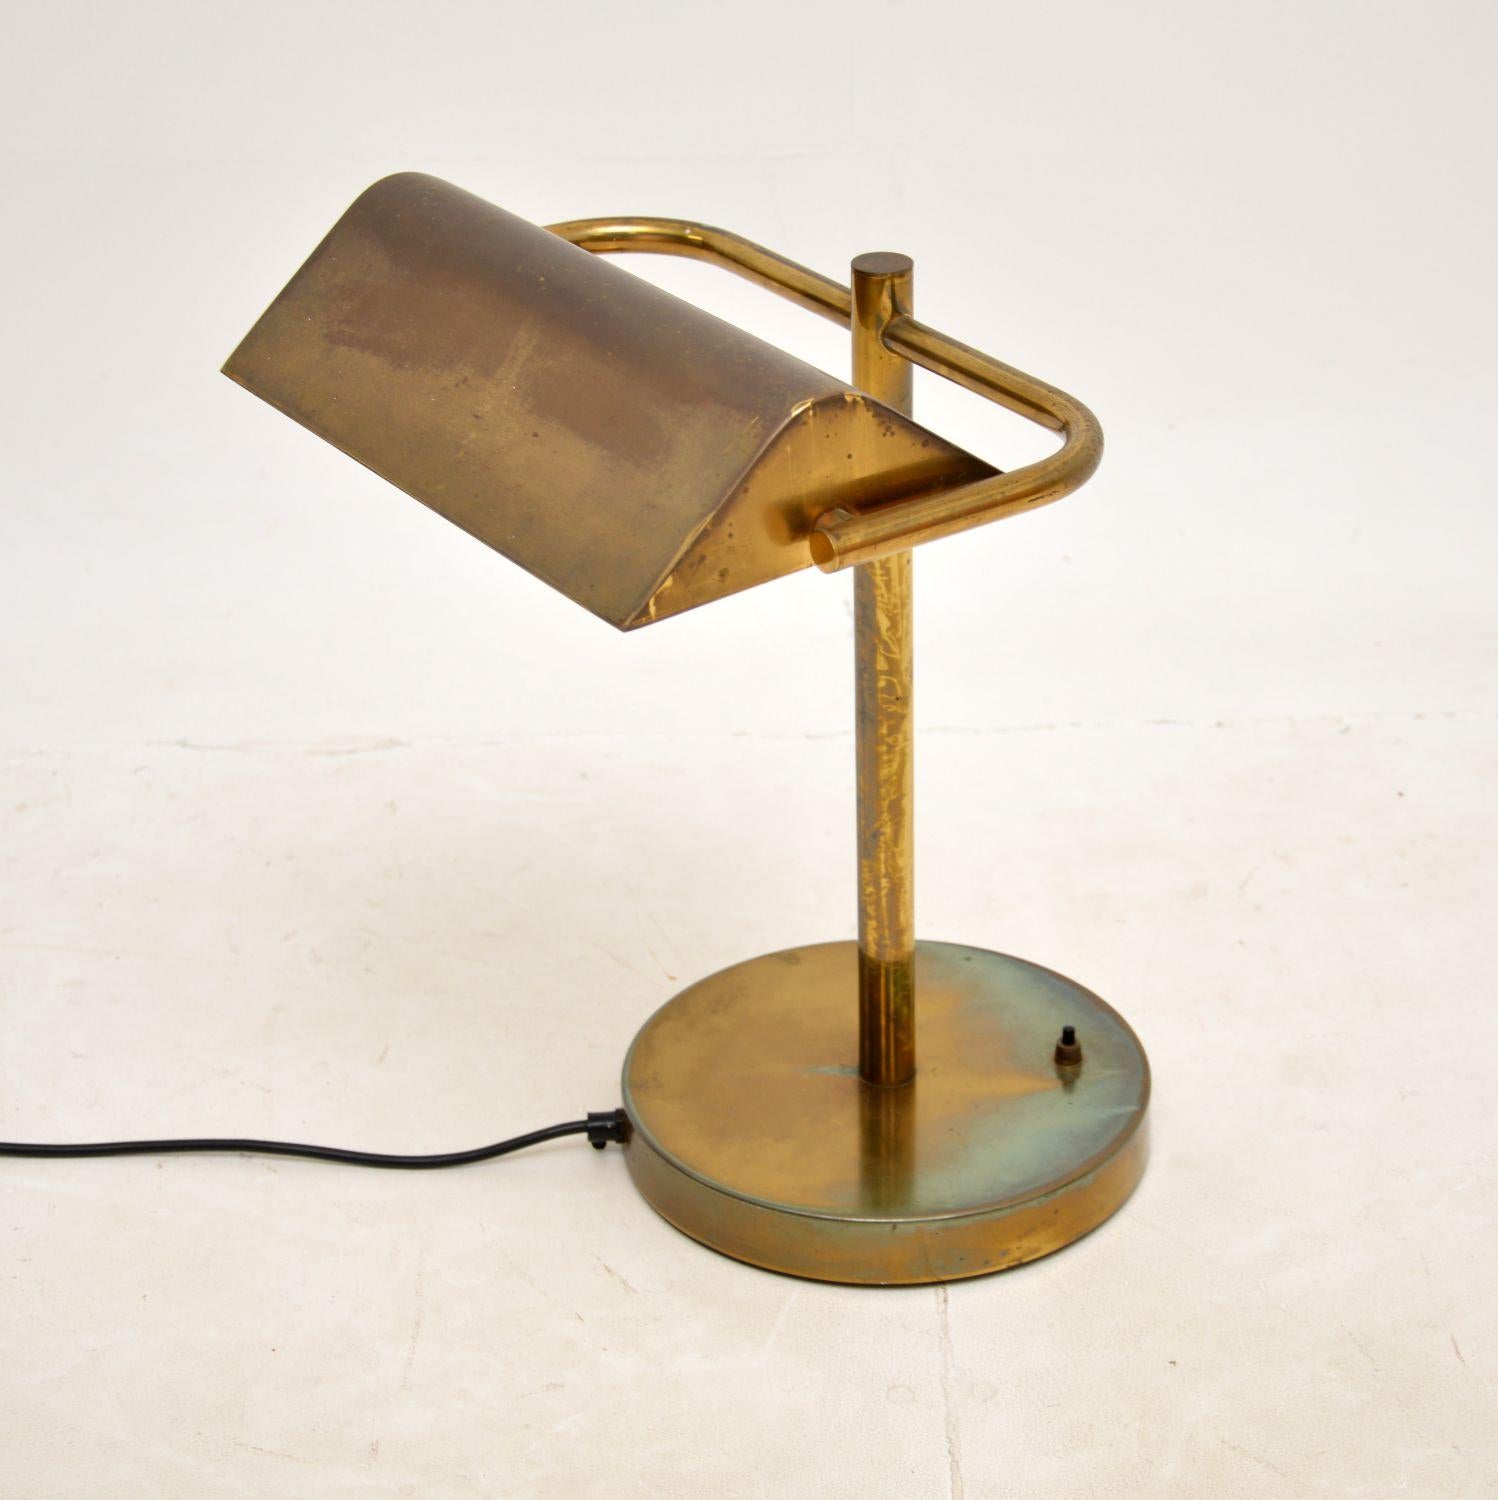 A large and impressive vintage brass bankers desk lamp. This was made in England, it dates from around the 1970s.

This is of outstanding quality, it is a great Size with a lamp shade can tilt and swivel. The brass has acquired a gorgeous colour